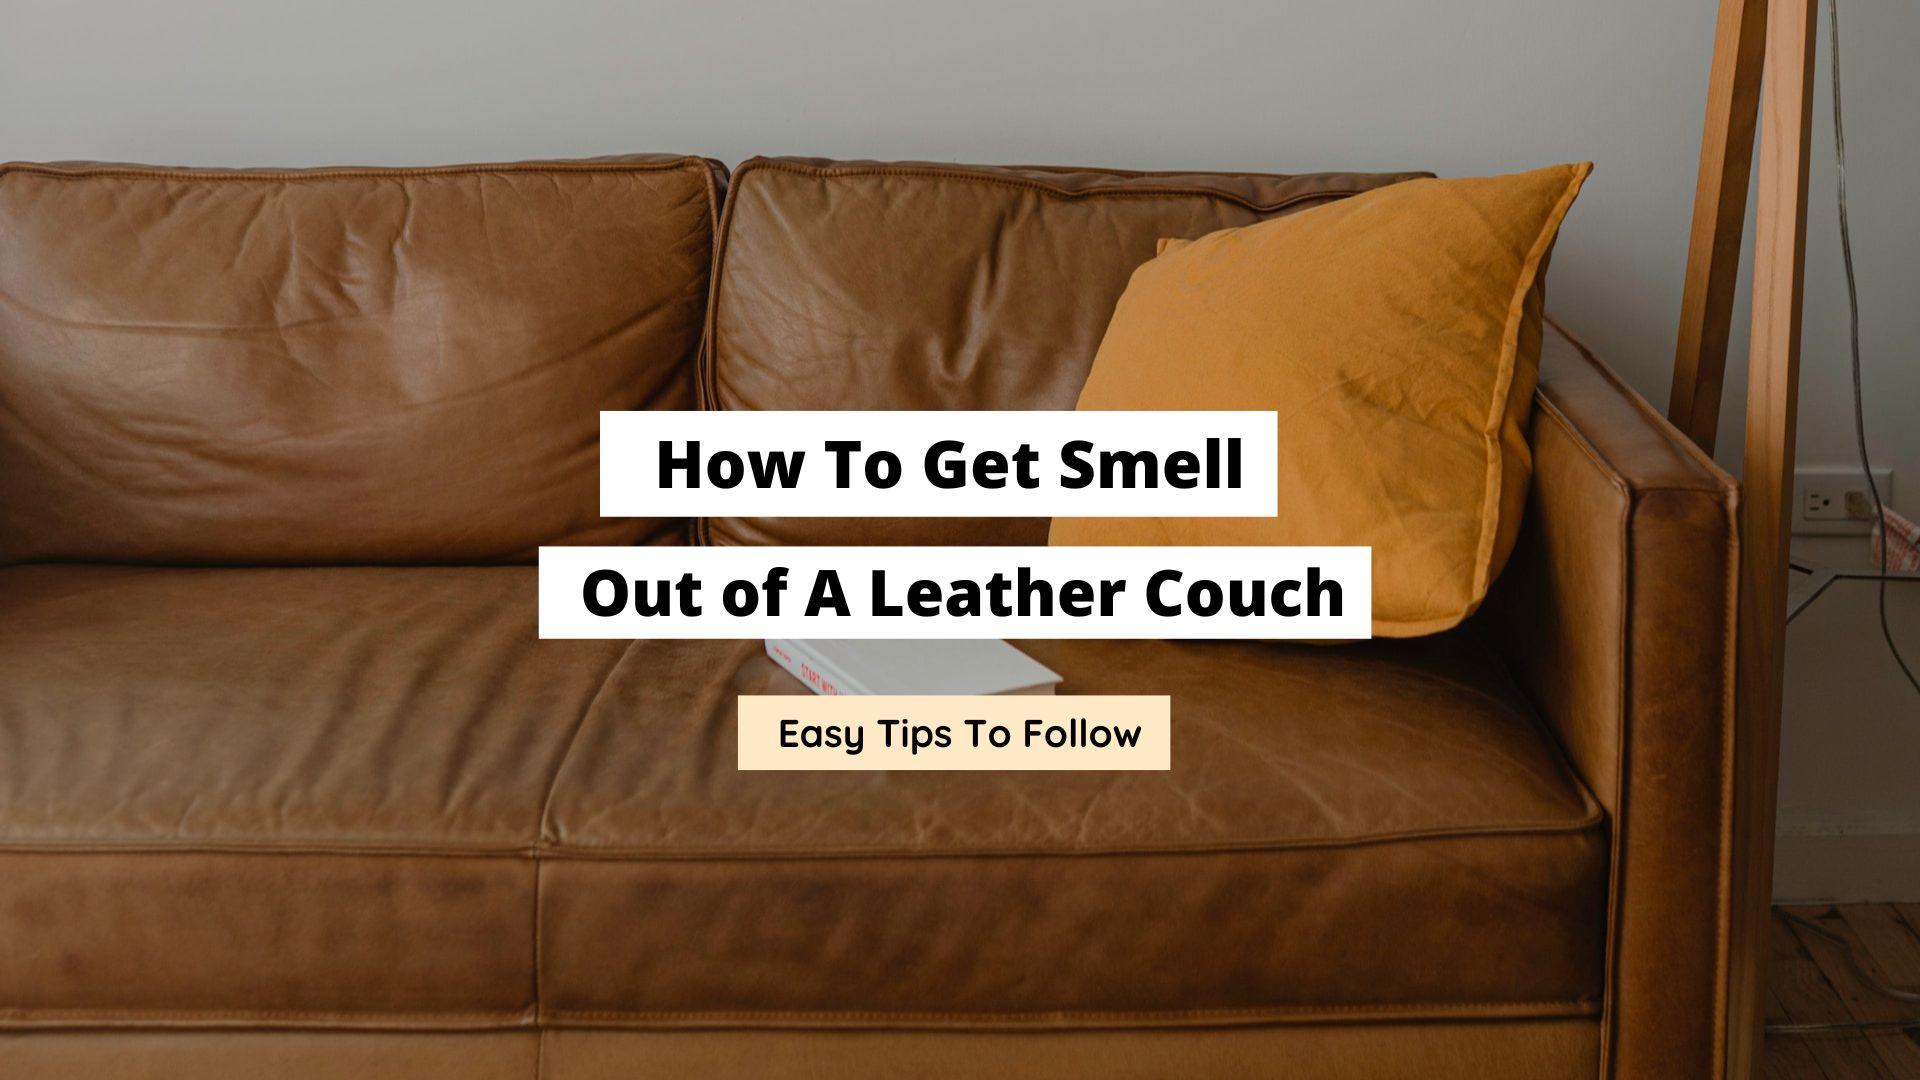 How To Get Smells Out of A Leather Couch